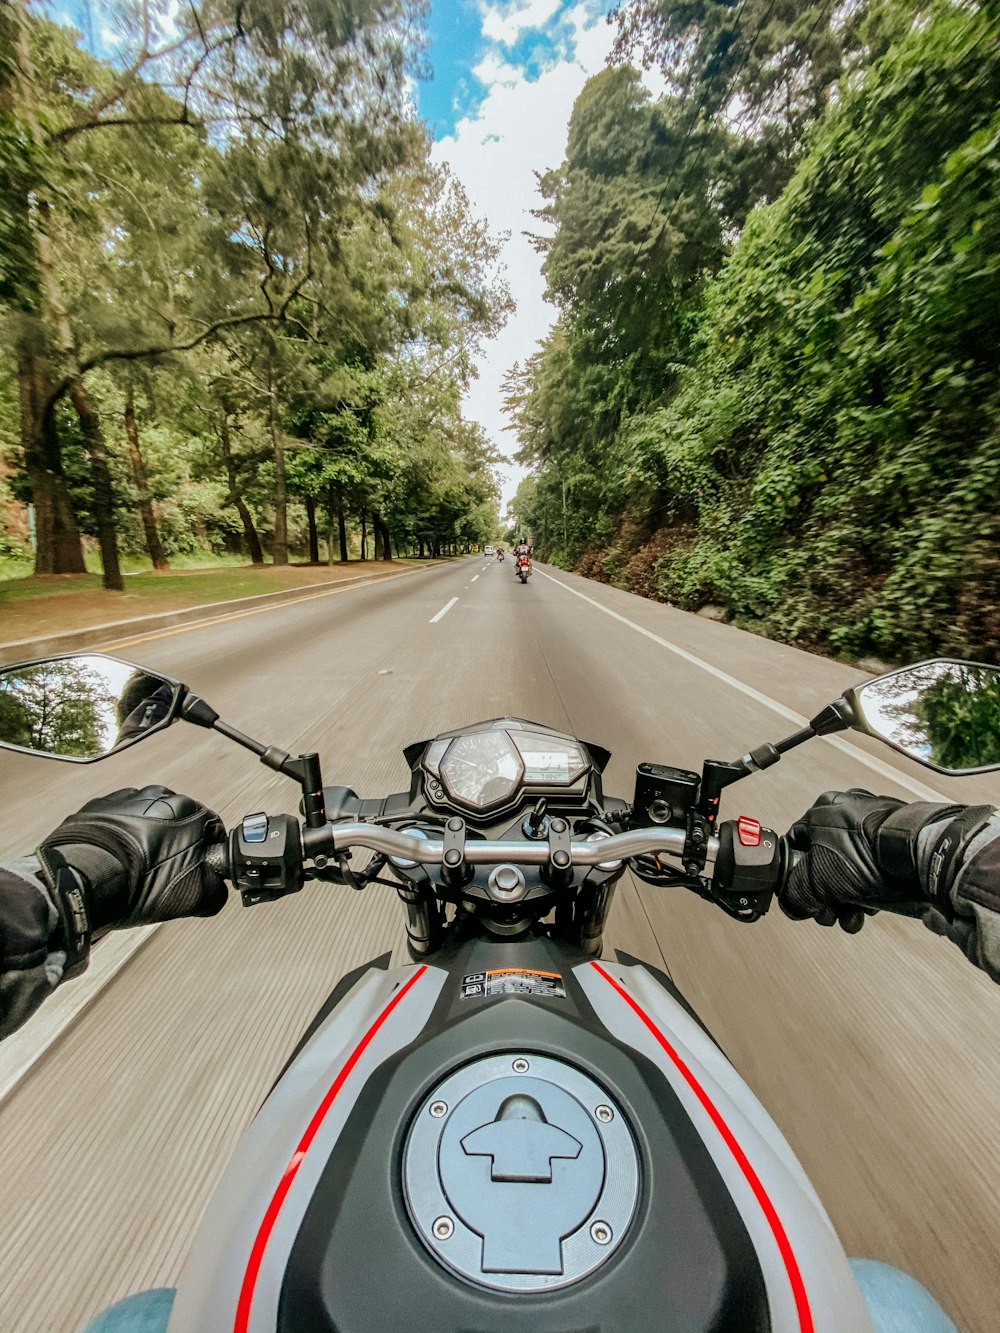 500+ Moto Pictures [HD] | Download Free Images on Unsplash